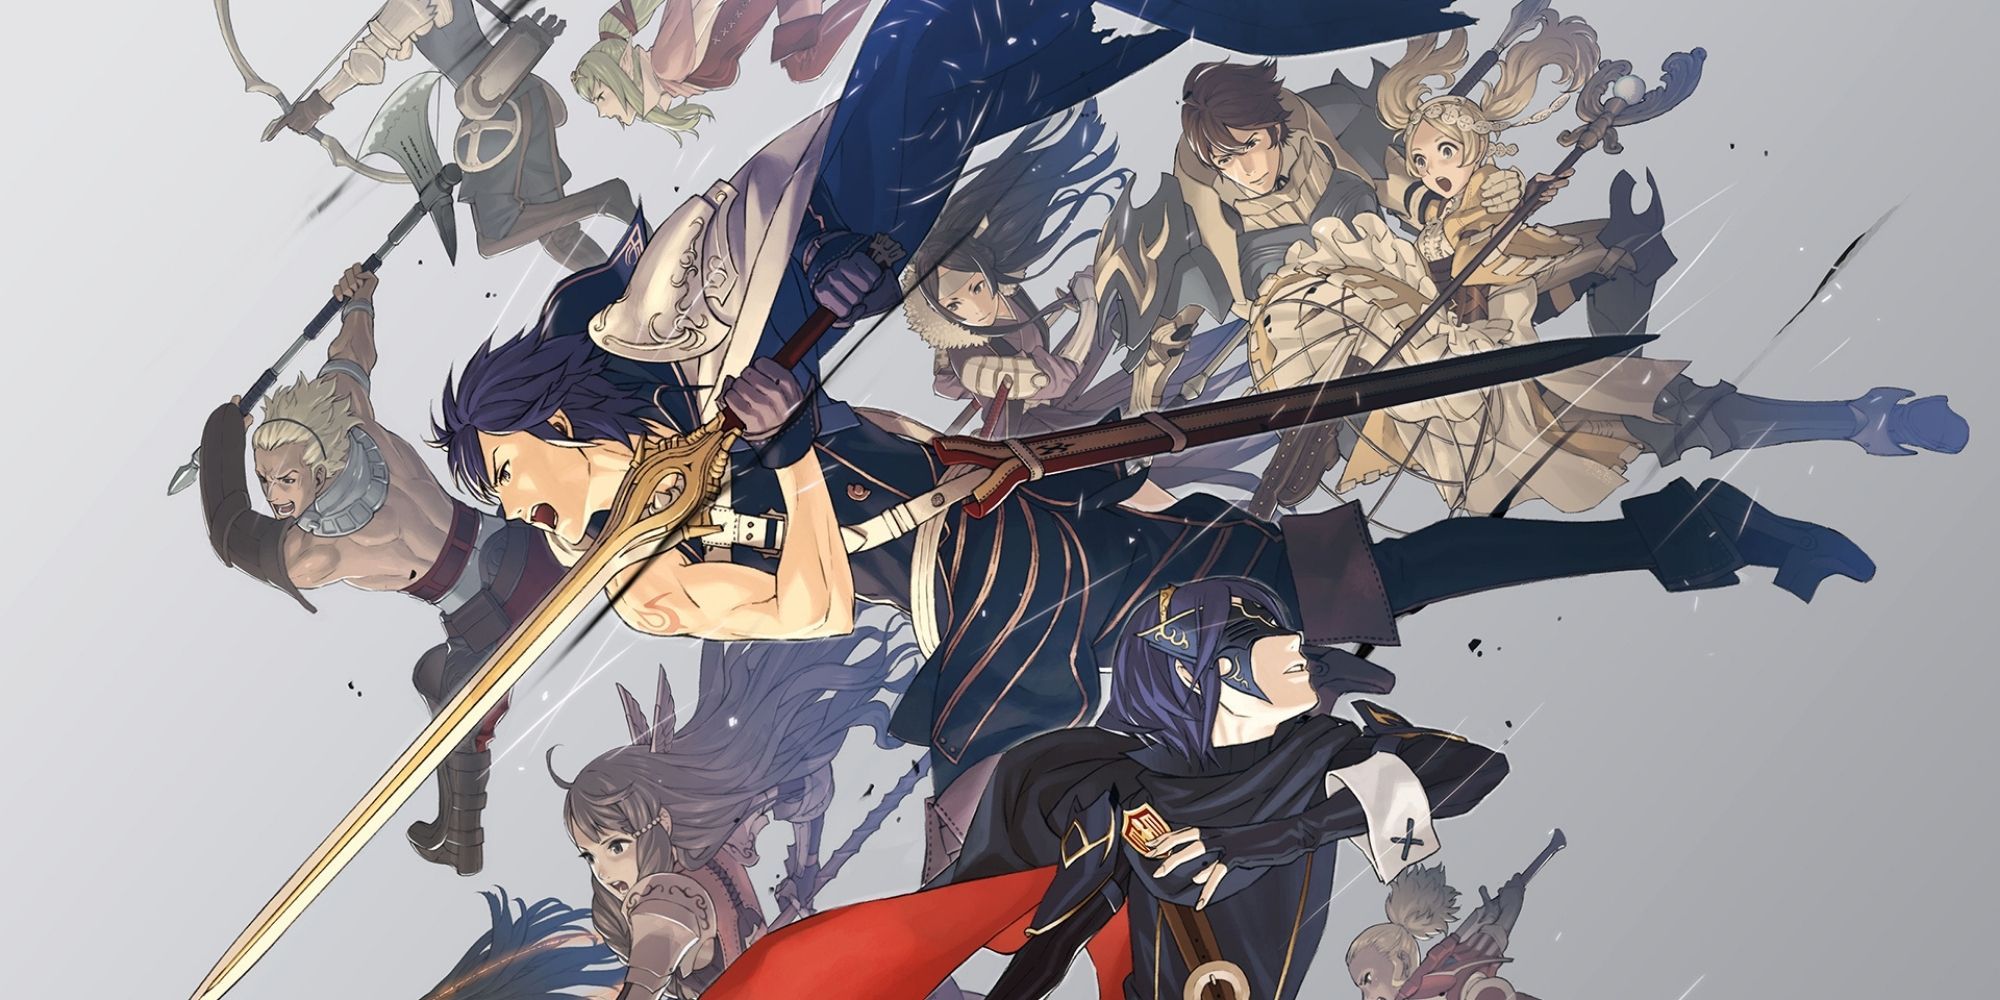 Chrom, Lucia, Lissa, Vaike, and more characters from Fire Emblem Awakening fall from the sky